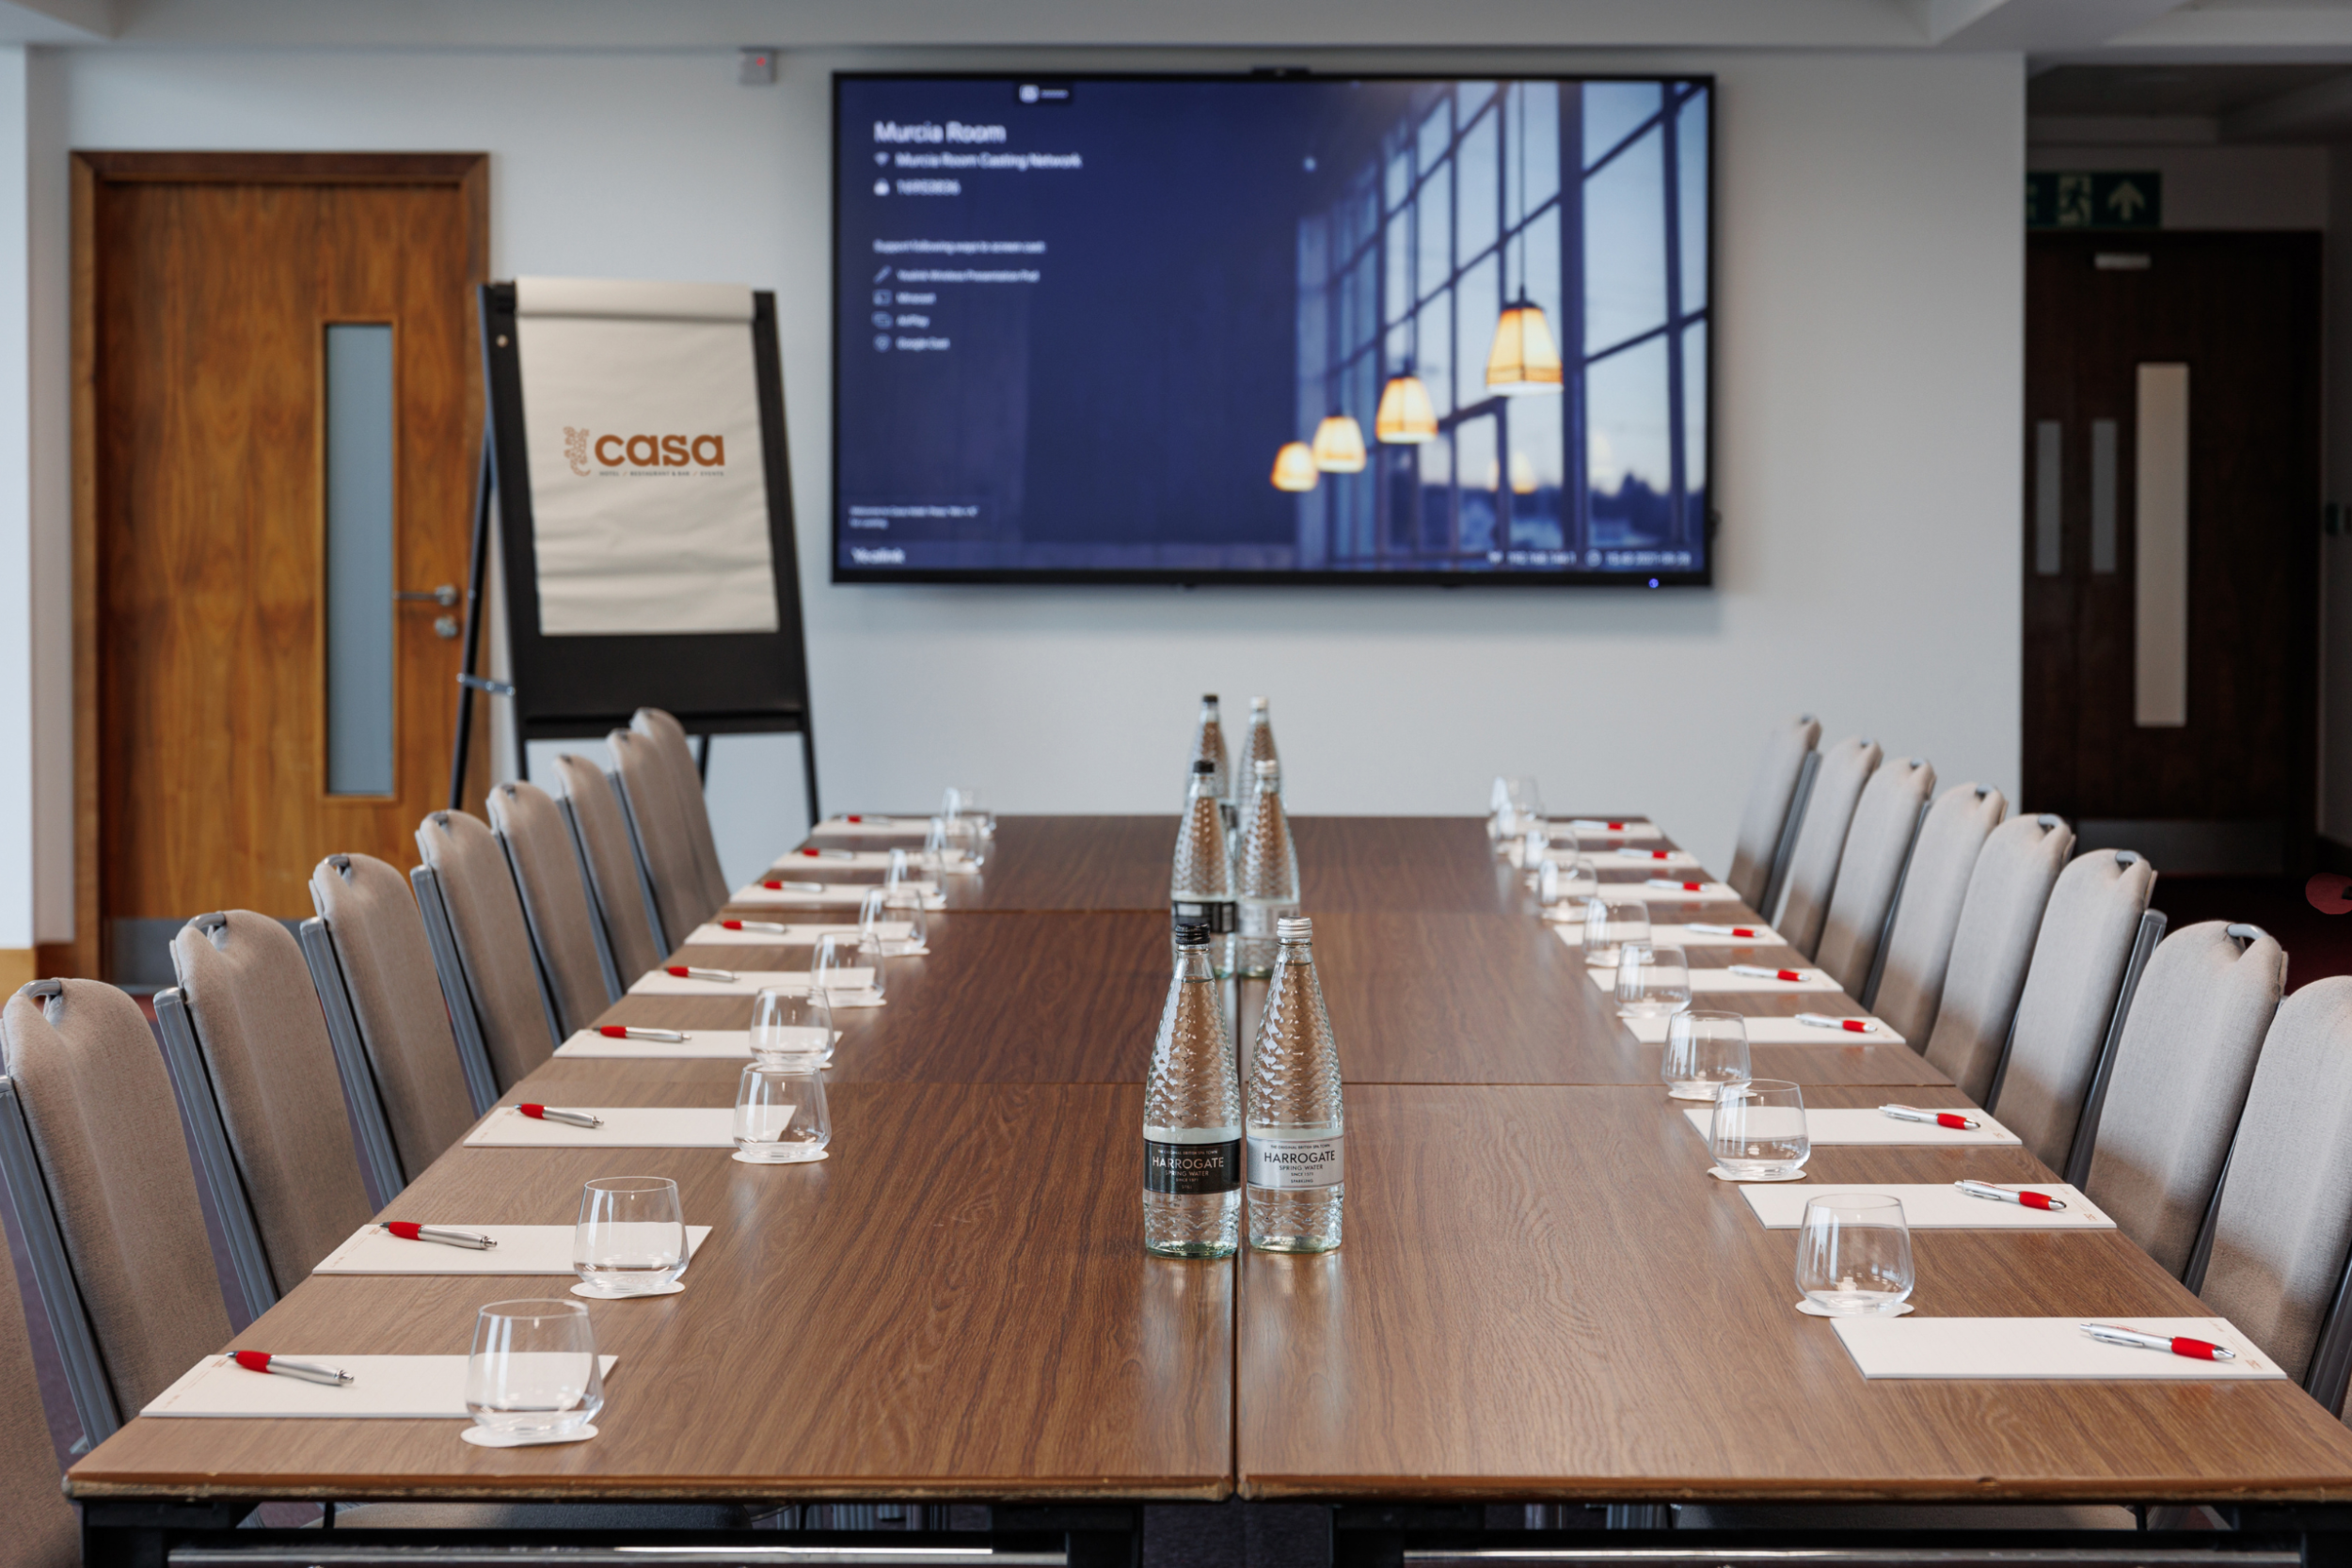 Casa Hotel conferencing and meeting space, Murcia Suite | Corporate events Chesterfield